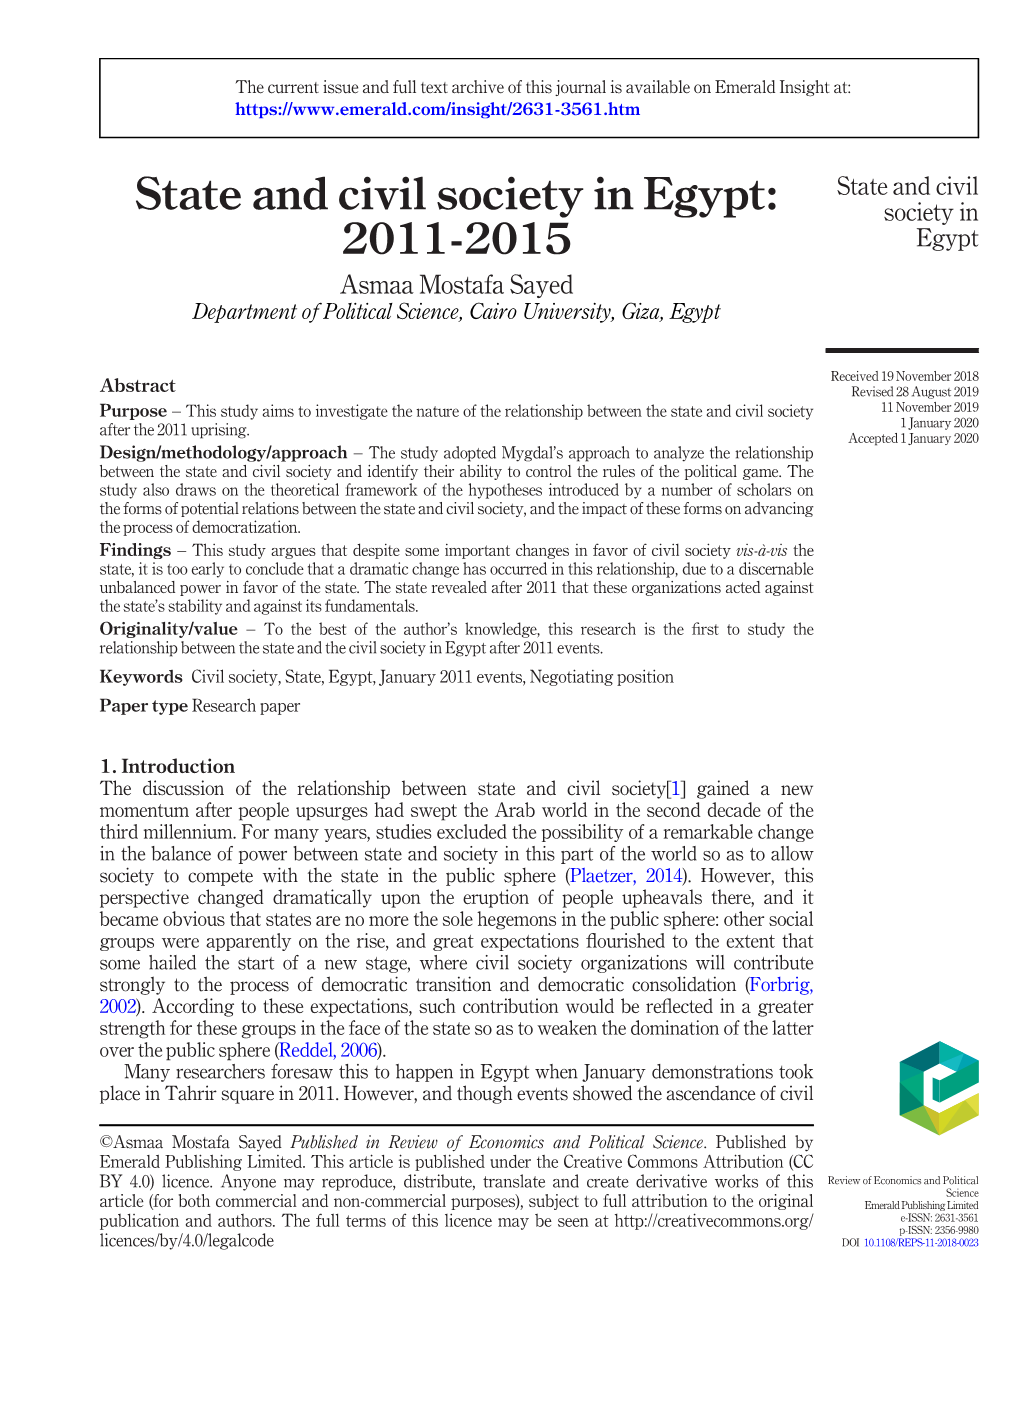 State and Civil Society in Egypt: 2011-2015